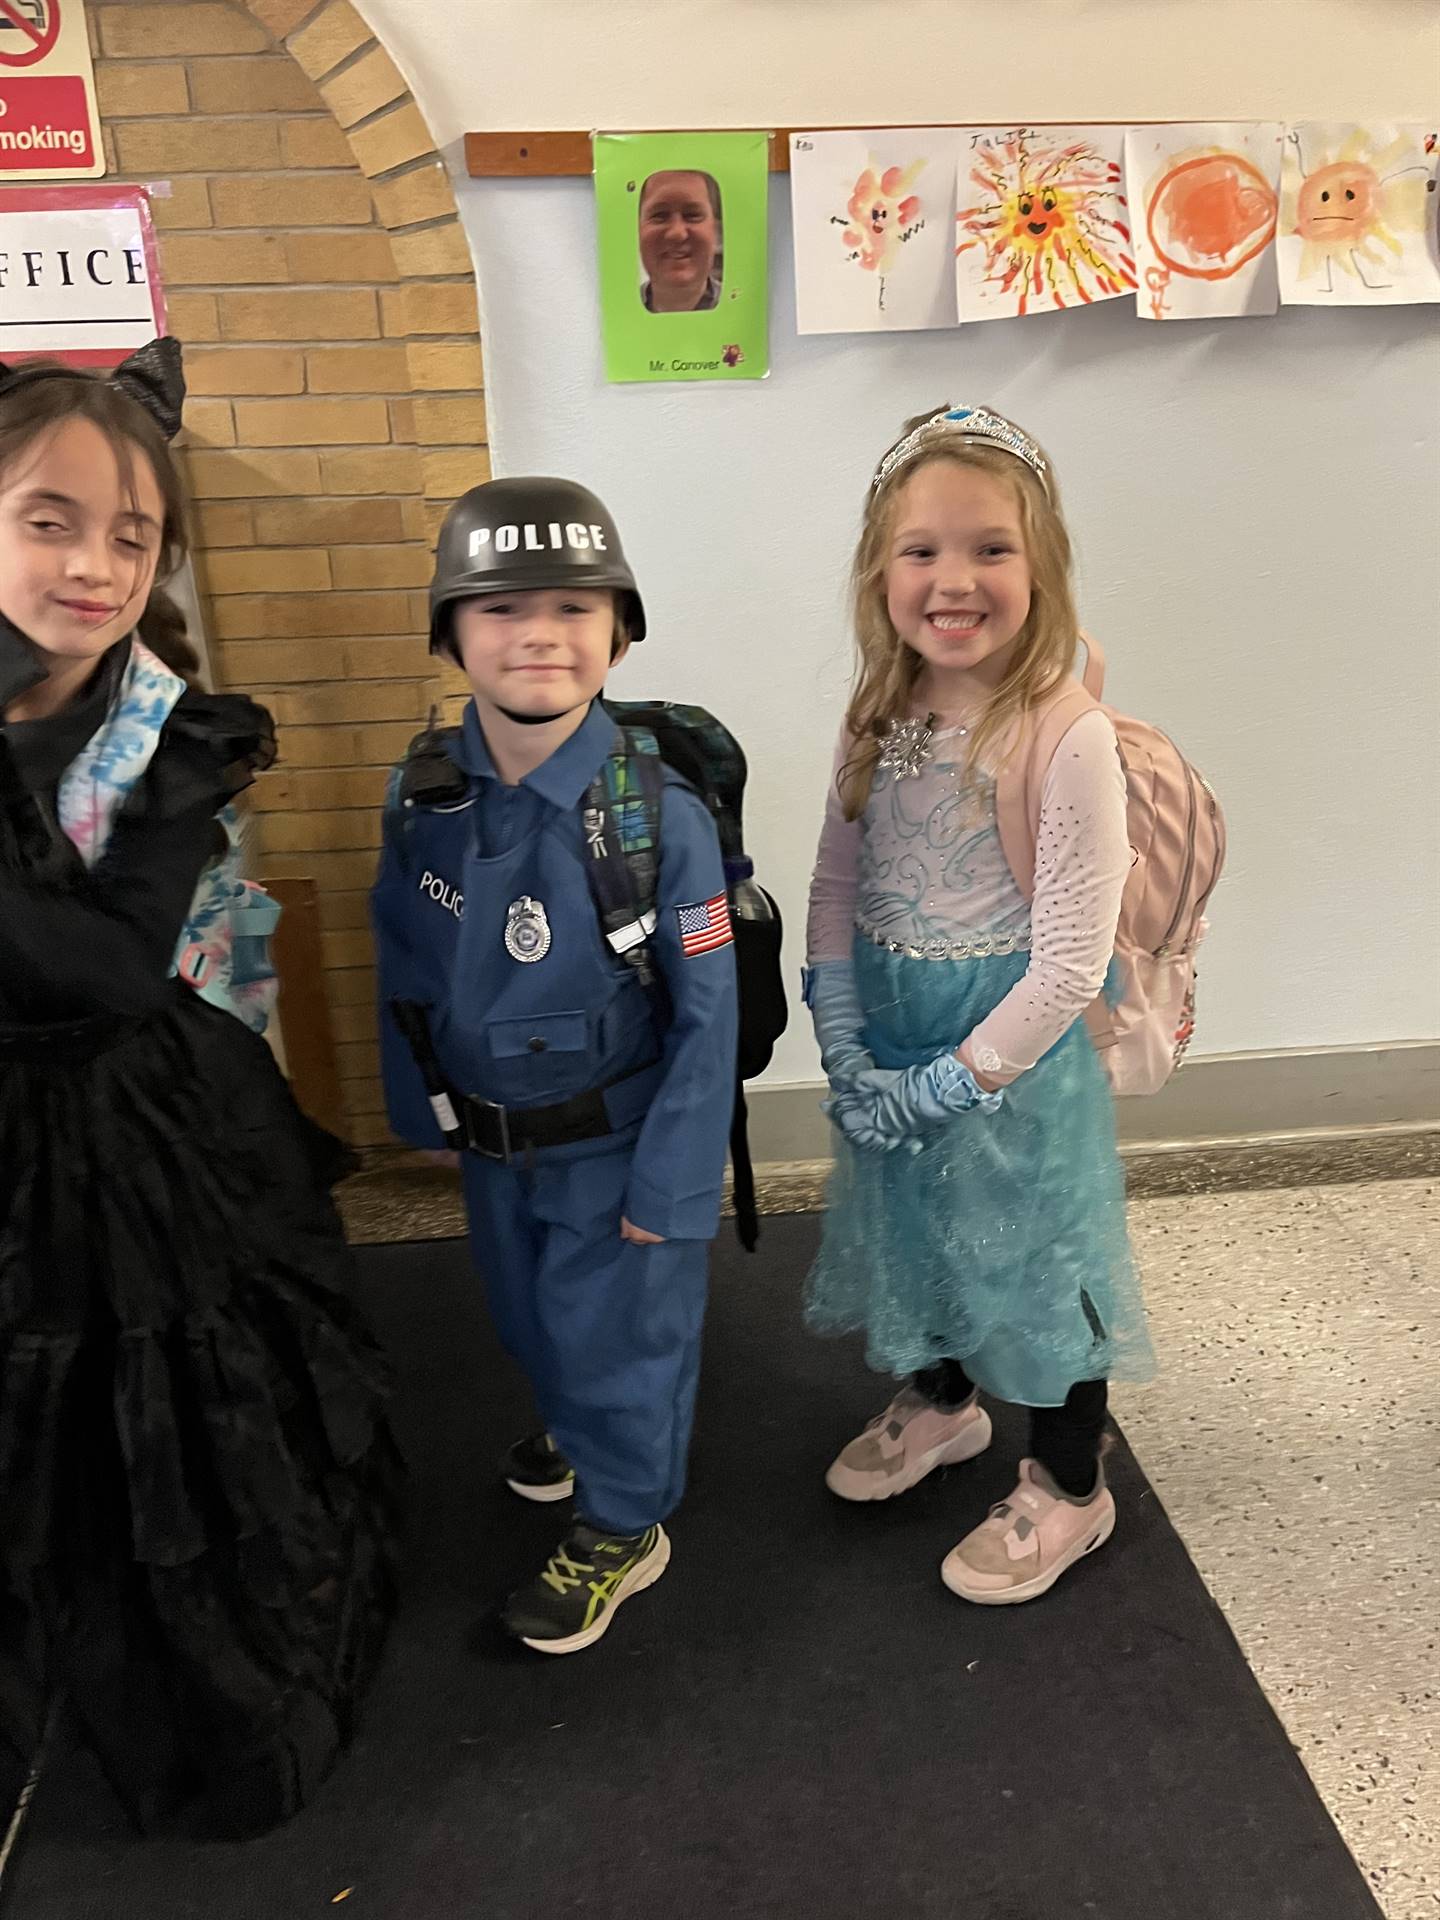 2 students dressed up. 1 police officer and other Elsa